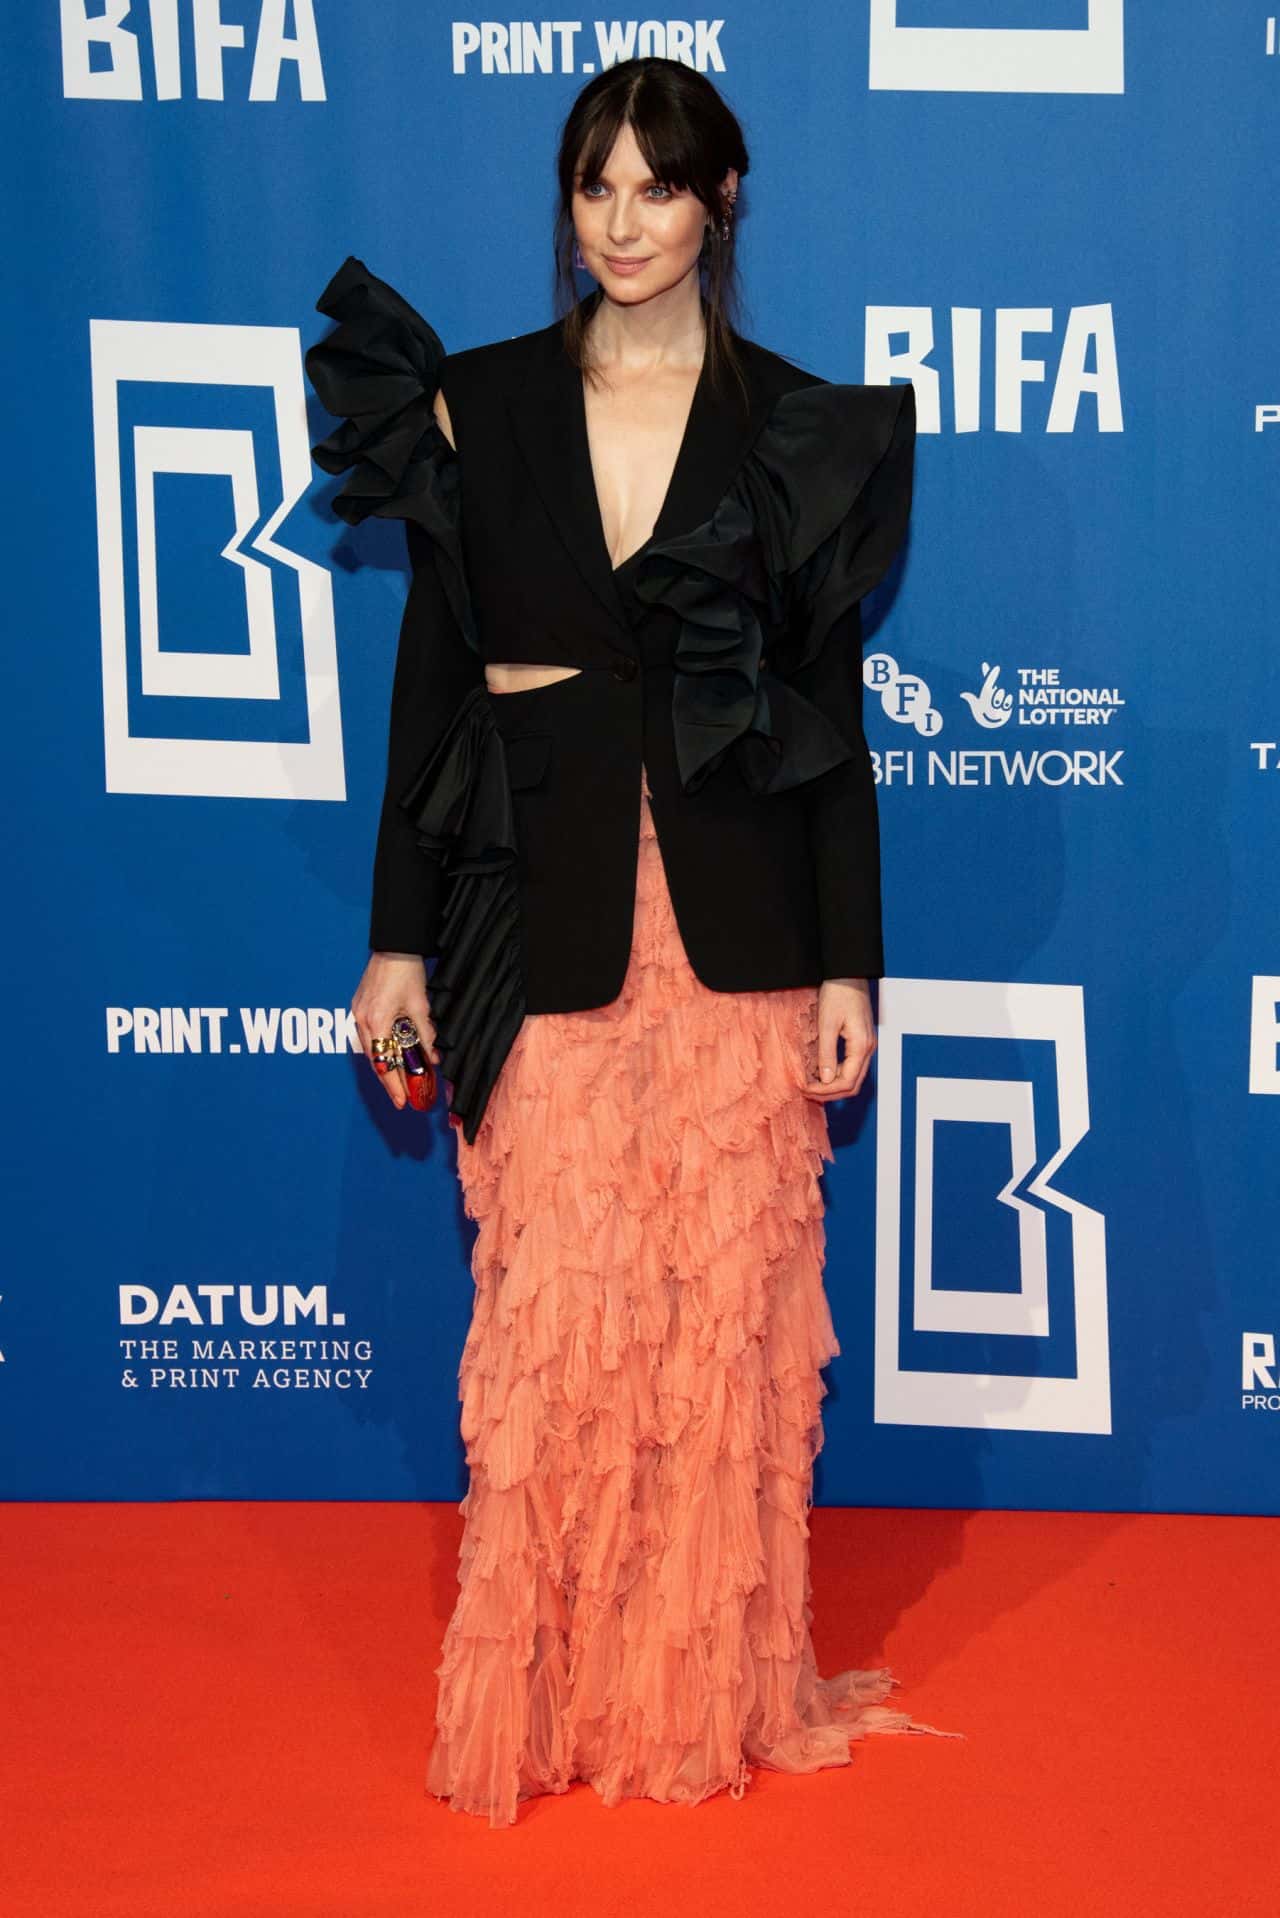 Caitriona Balfe Looked Amazing in an Edgy Blazer at the 2021 BIFA